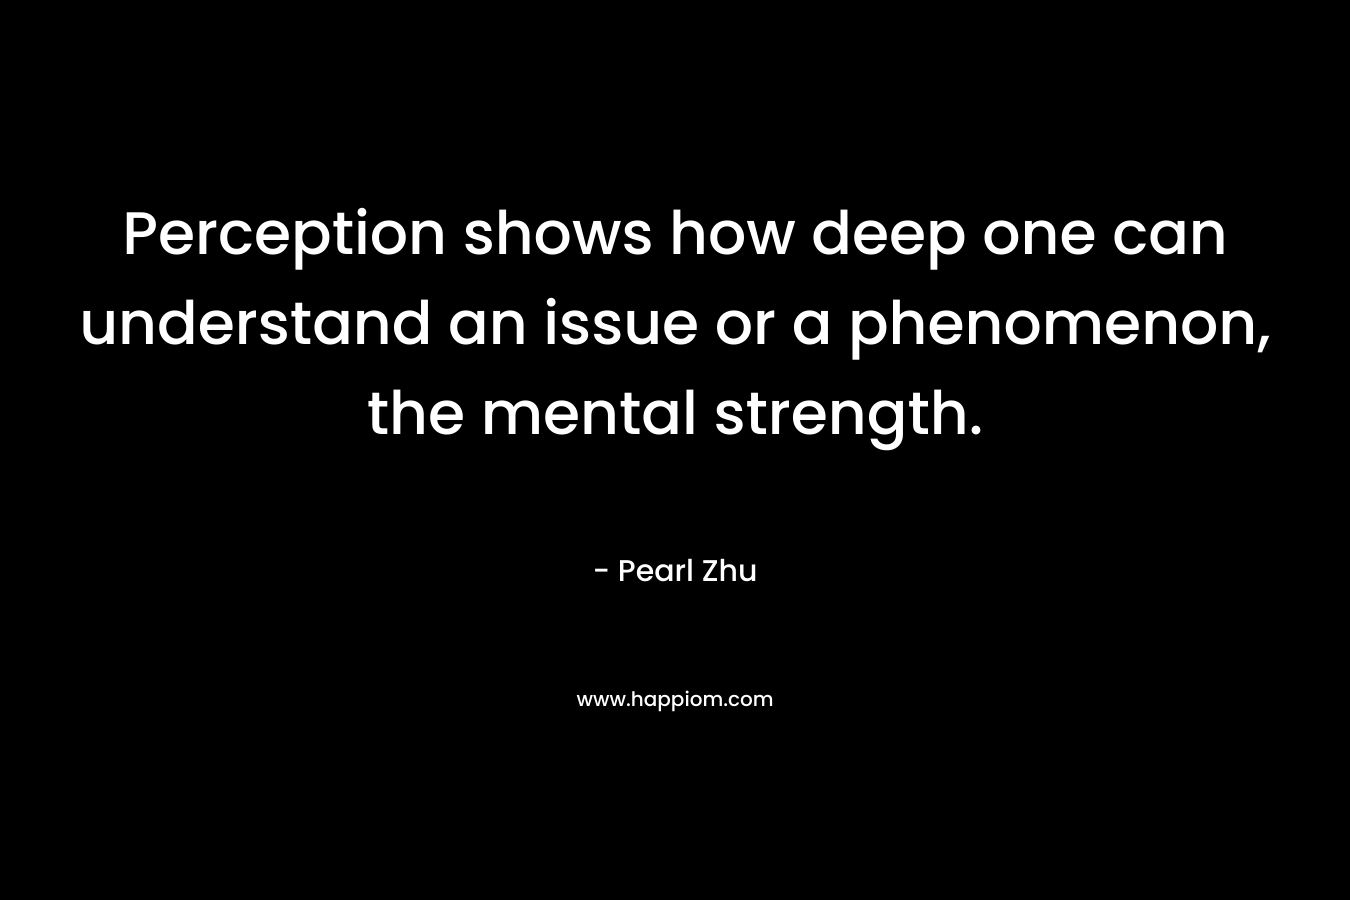 Perception shows how deep one can understand an issue or a phenomenon, the mental strength. – Pearl Zhu